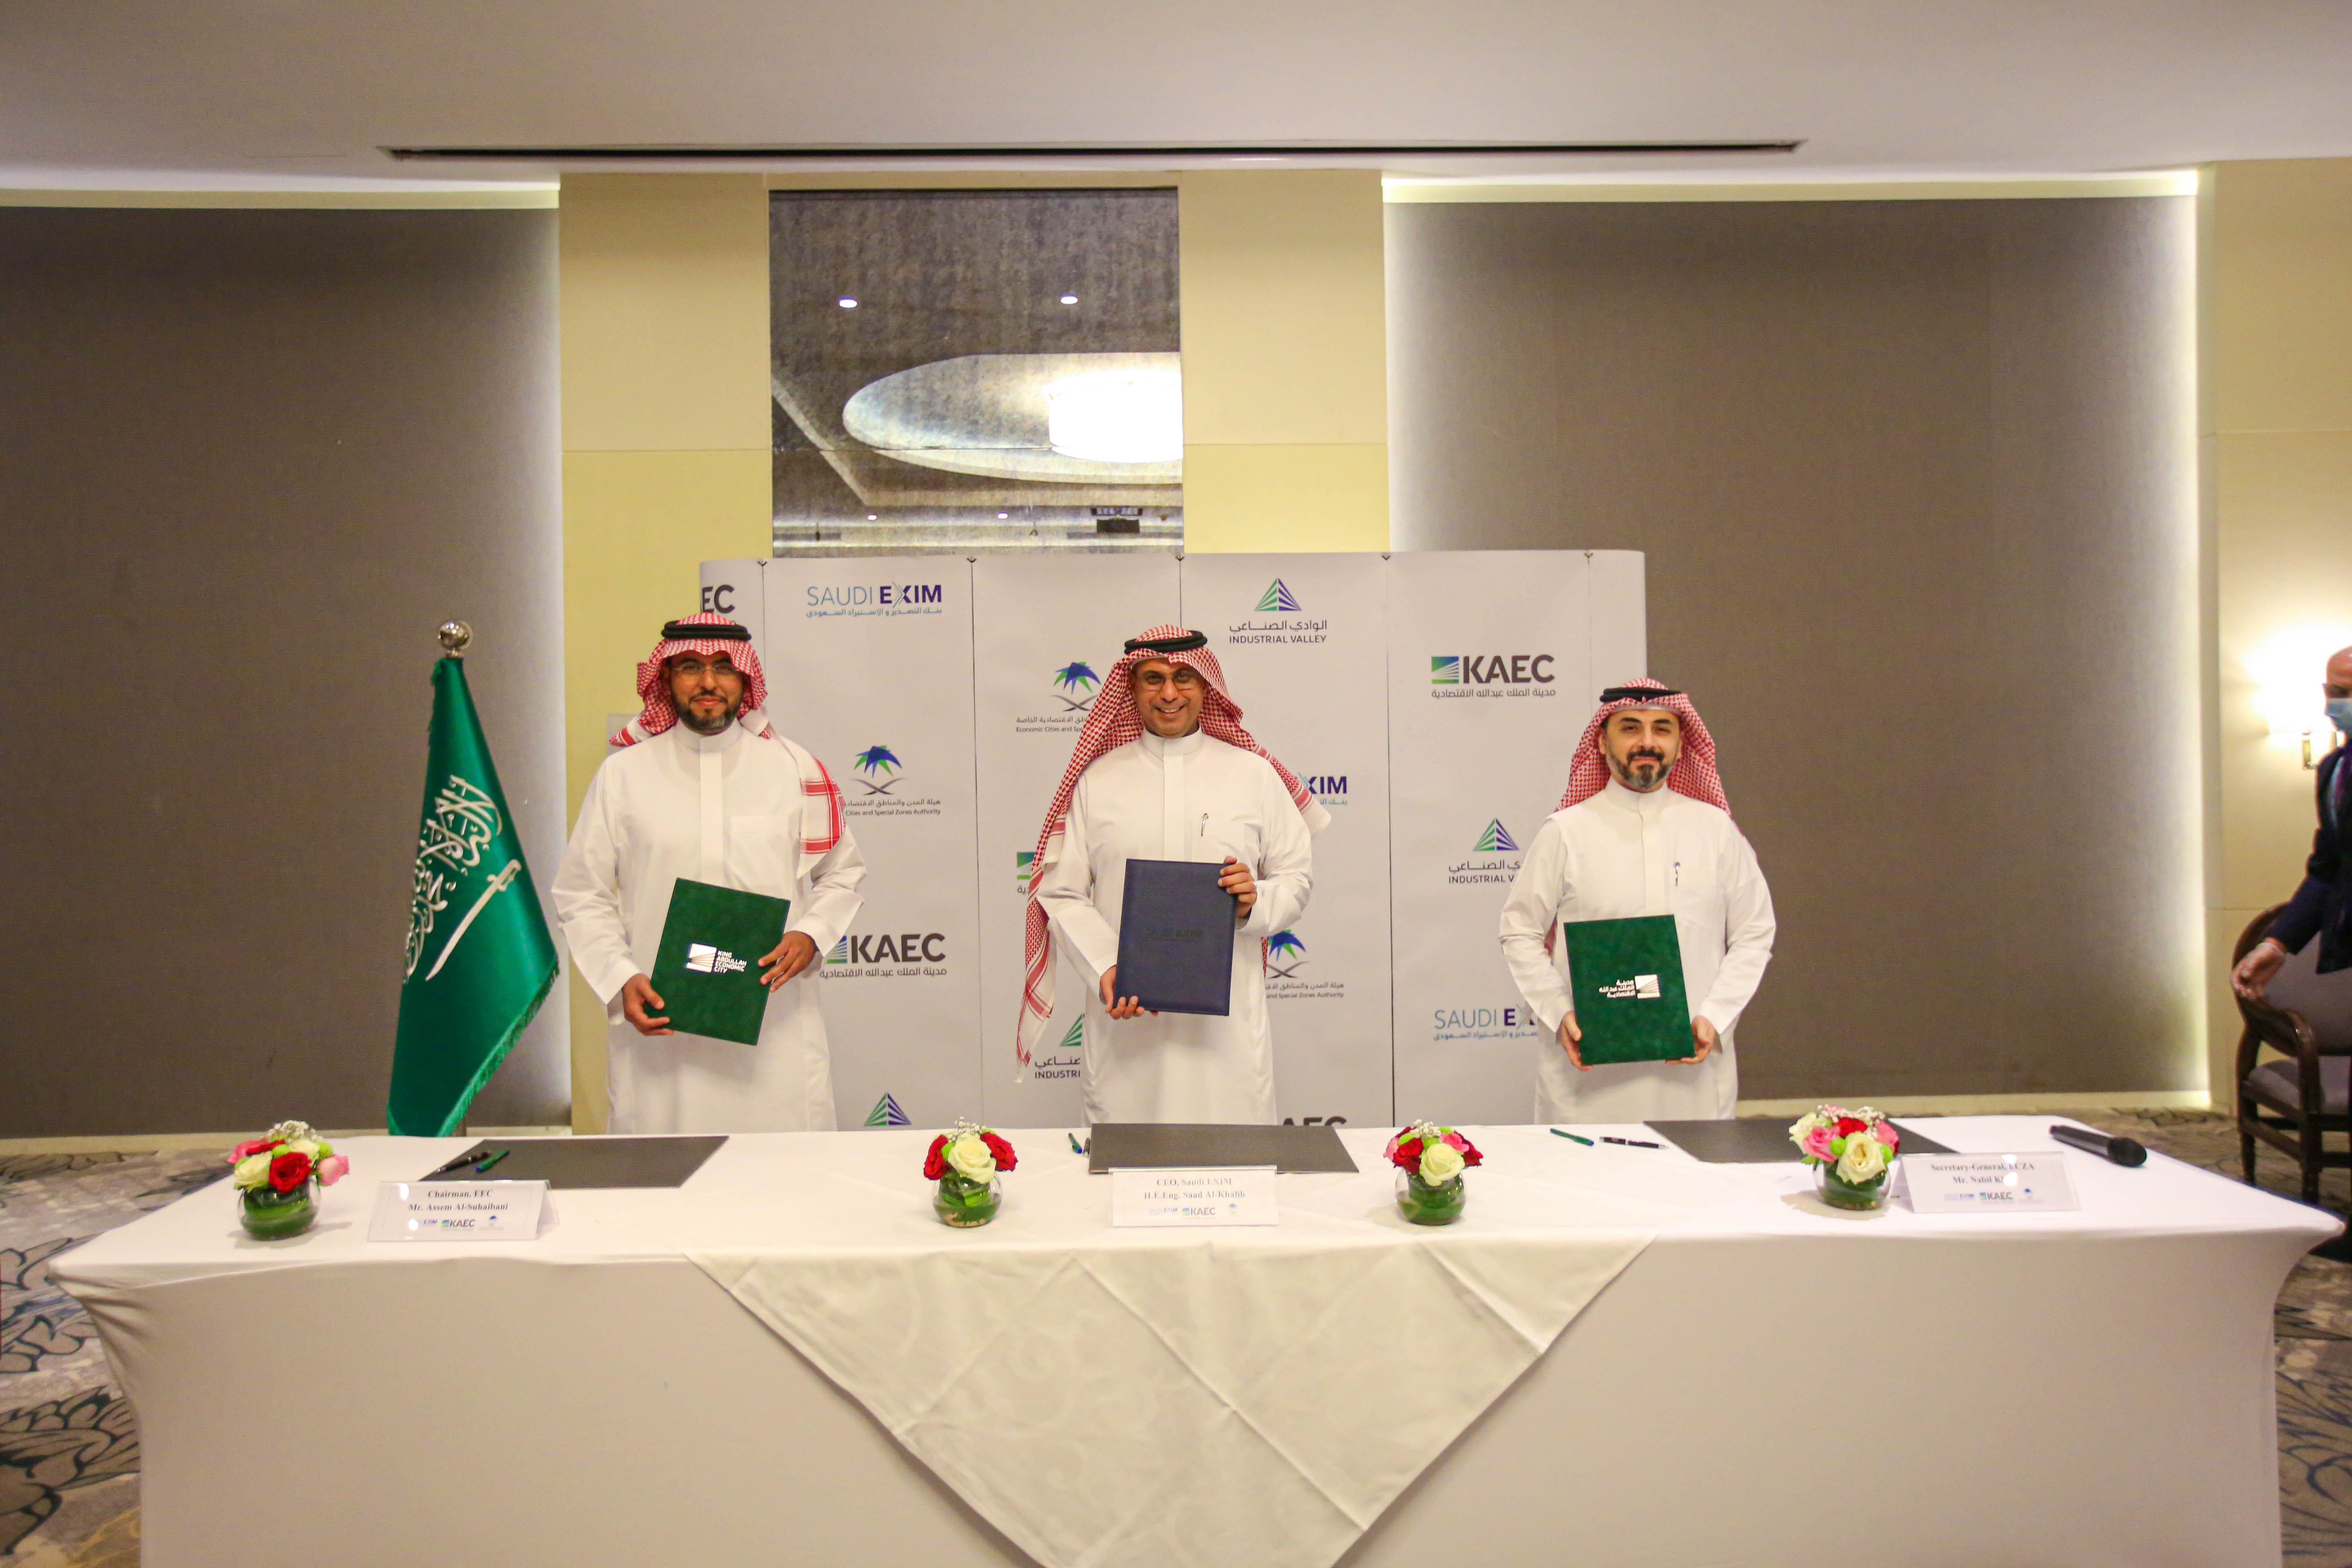 Saudi EXIM Starts More Partnerships to Offer Credit & Financing Facilities to Industrial Valley Companies to Boost Saudi Products’ Global Competitiveness 